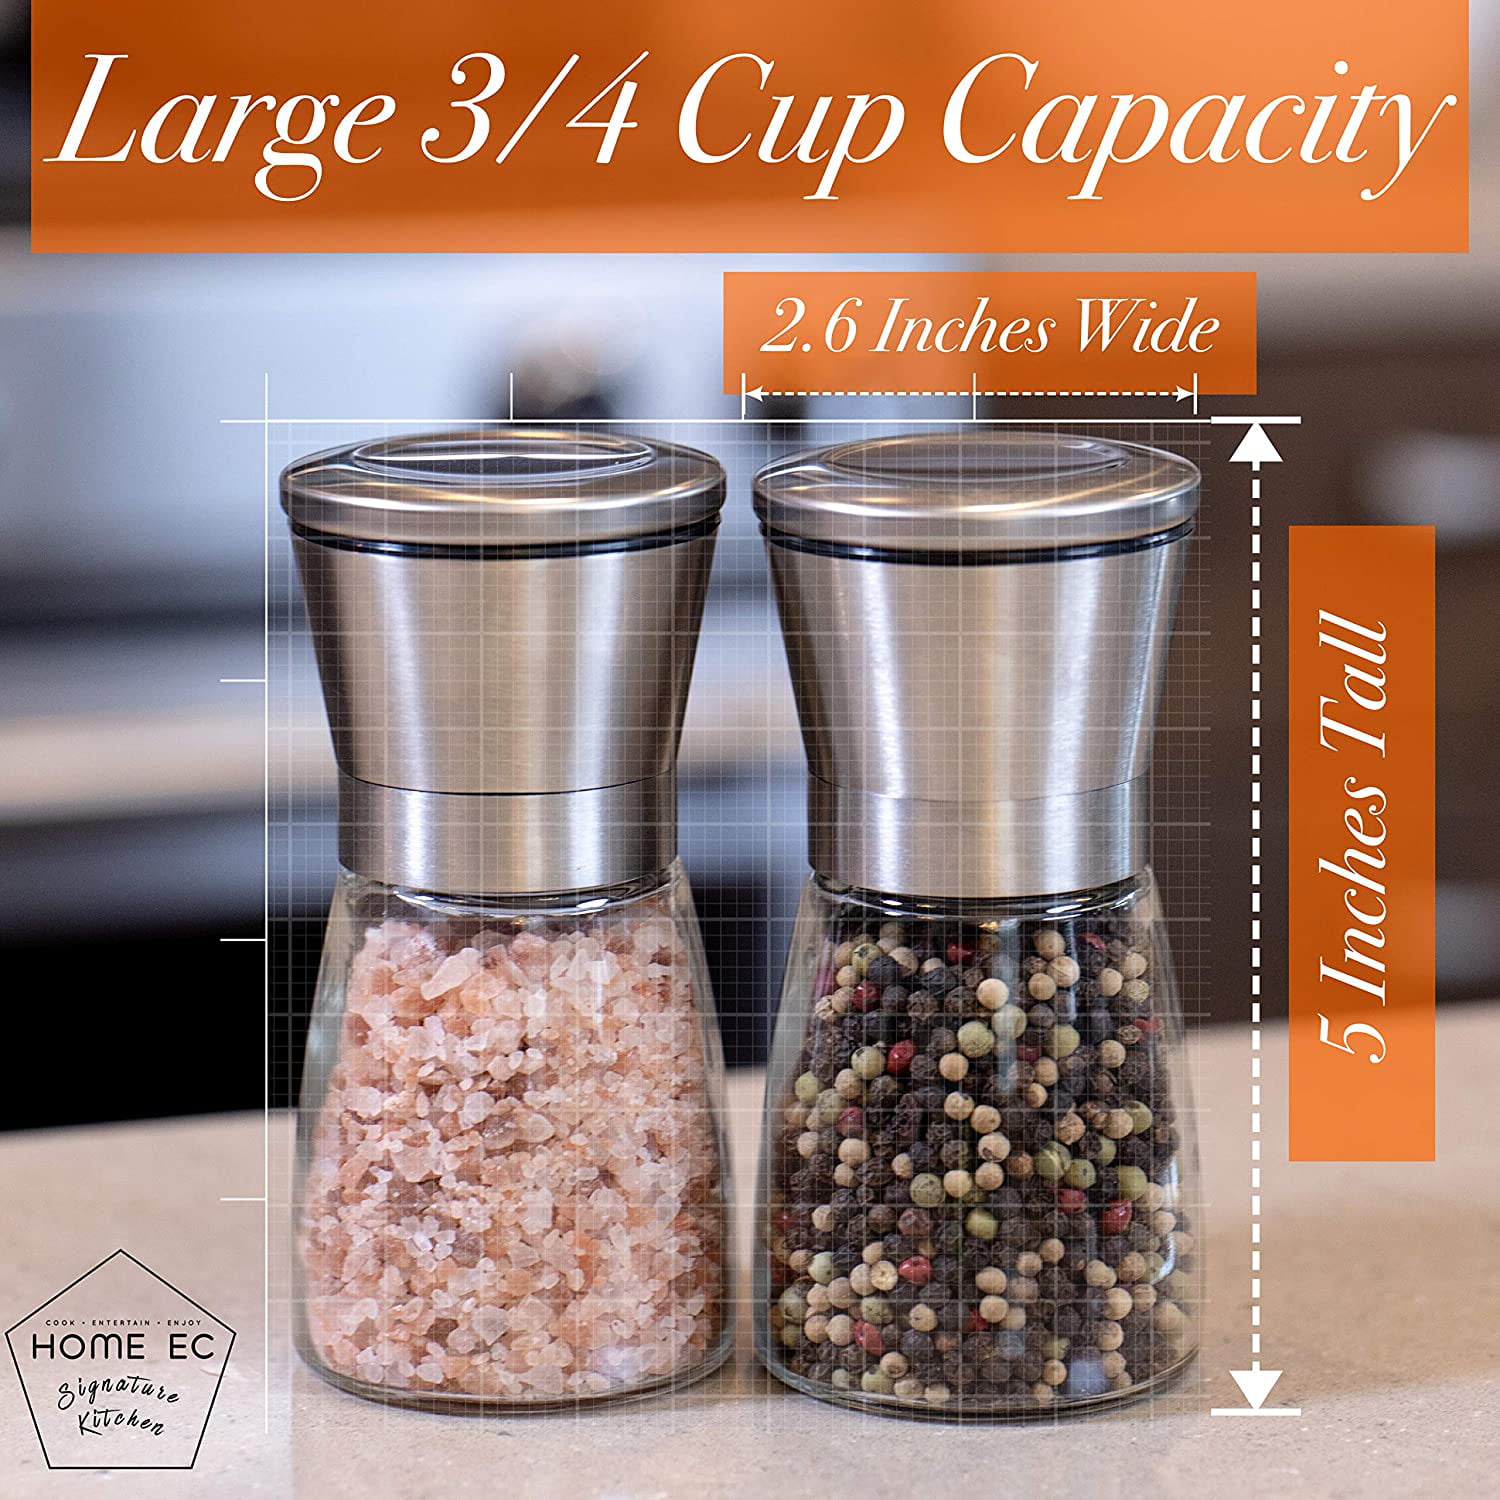 Gling Salt and Pepper Grinder Set - Refillable Sea Salt & Peppercorn Stainless Steel Shakers - 75 inch